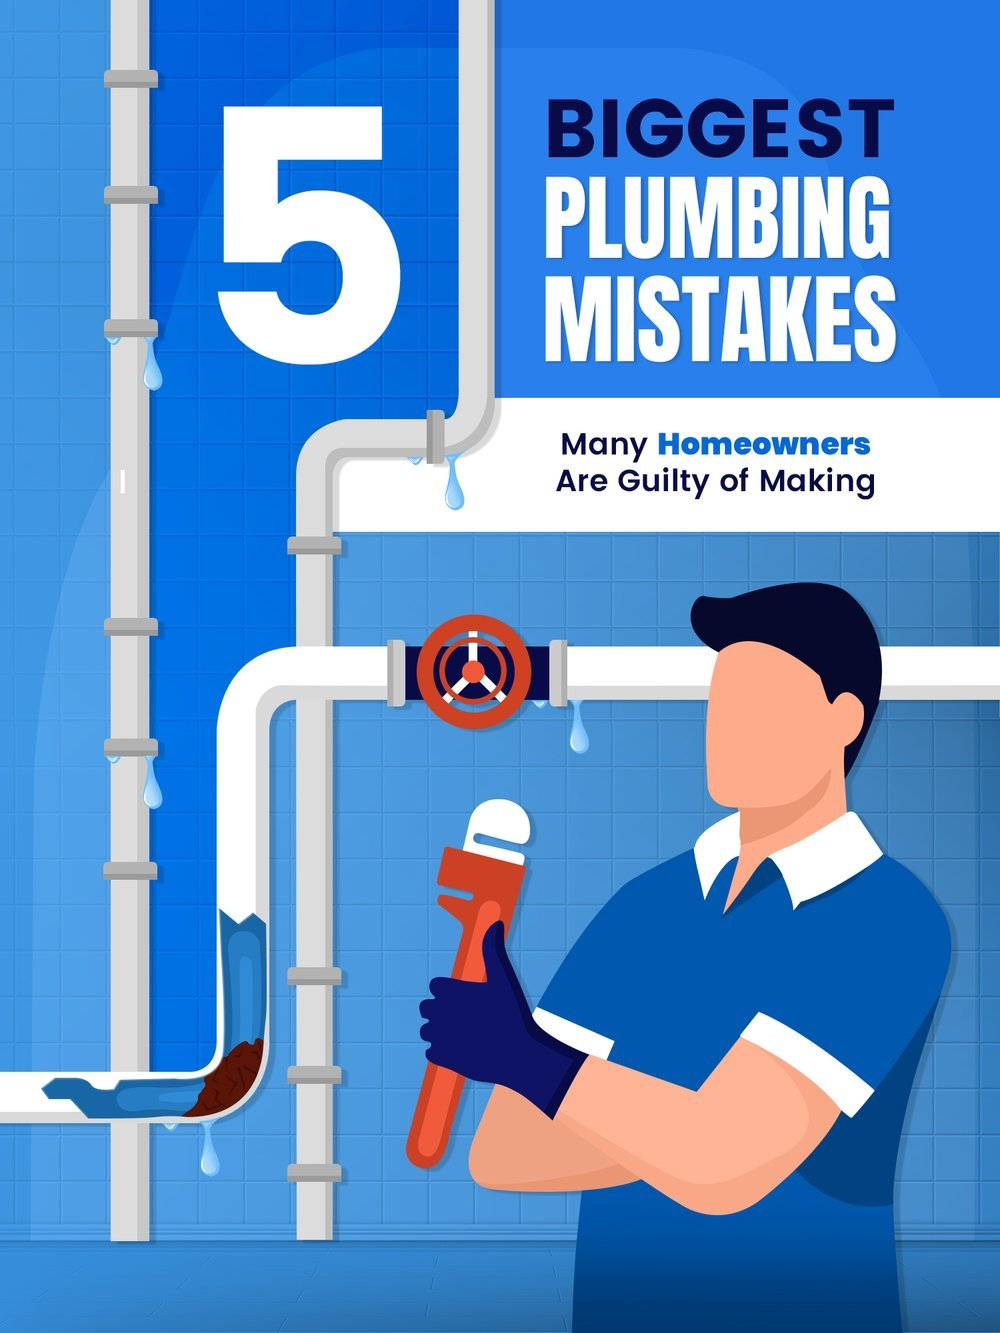 Top 5 Plumbing Mistakes Seattle Homeowners Should Avoid to Prevent Costly Repairs